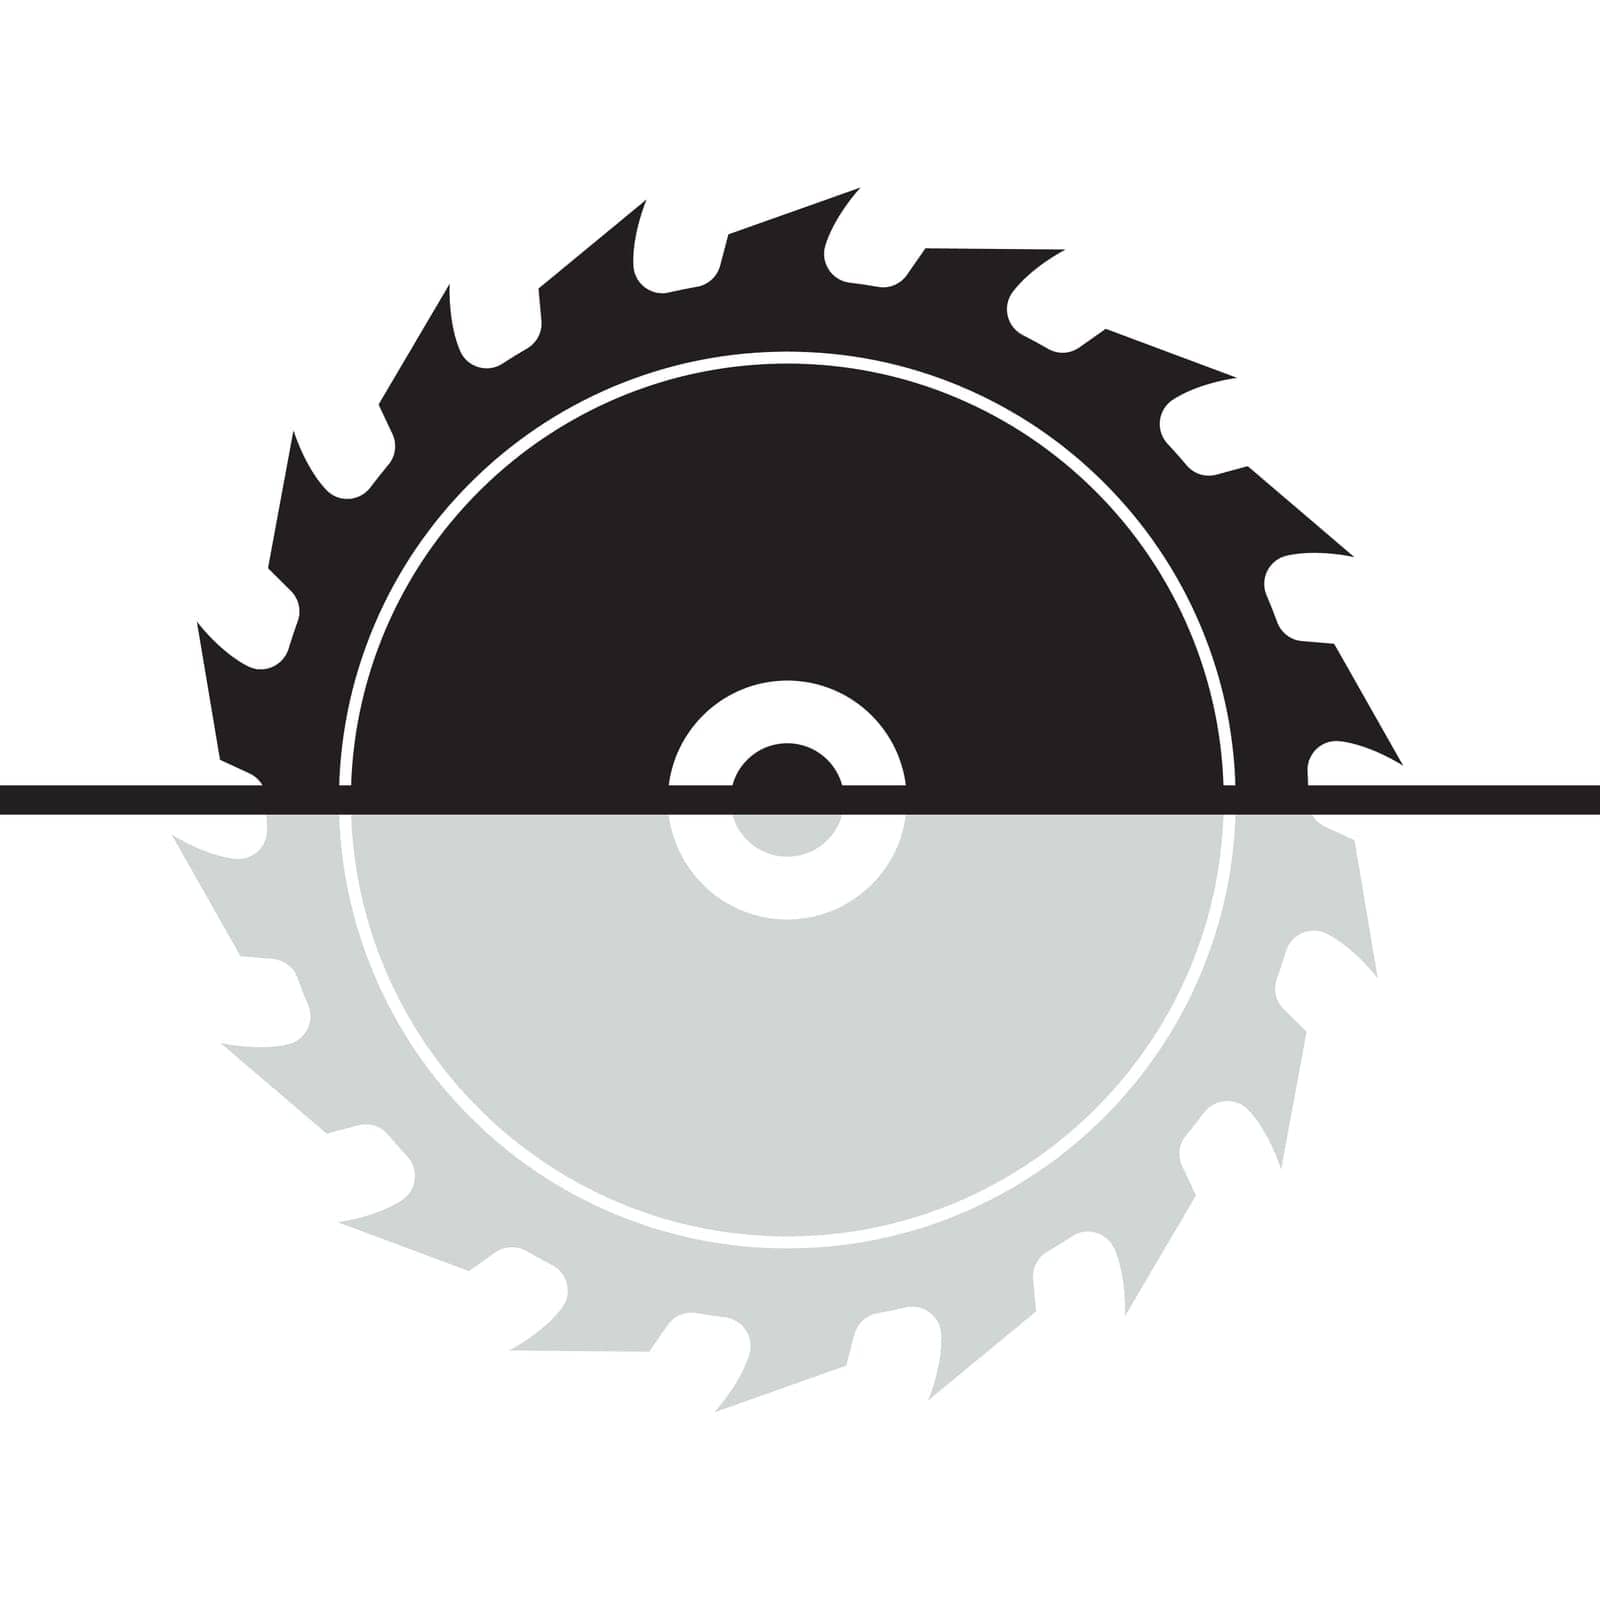 Circular saw vector icon illustration sign for web and design